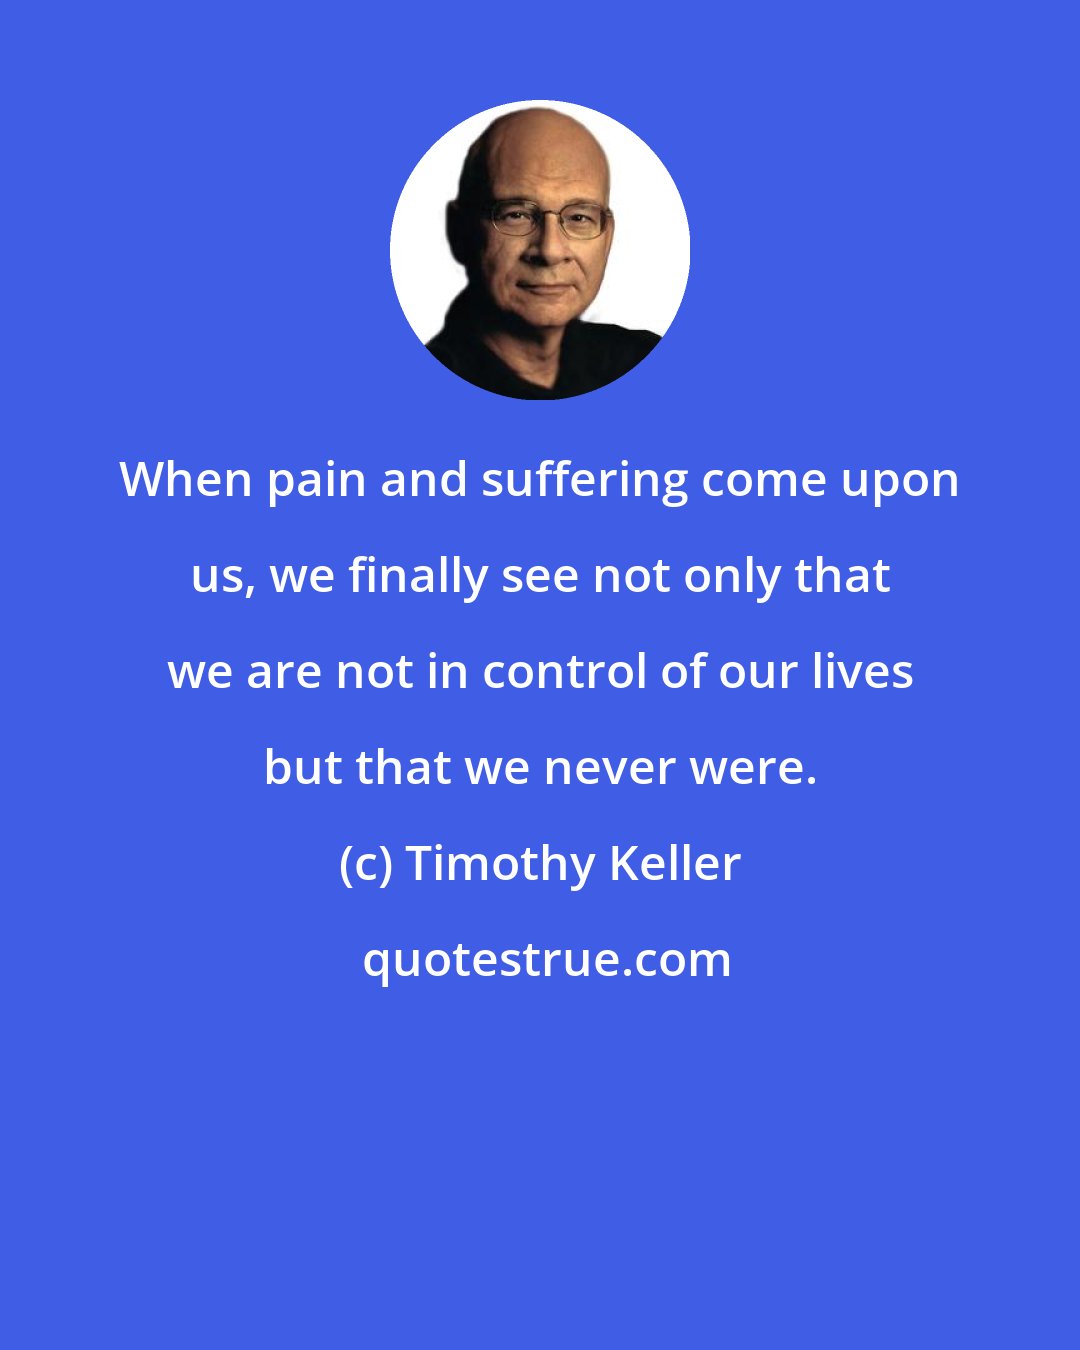 Timothy Keller: When pain and suffering come upon us, we finally see not only that we are not in control of our lives but that we never were.